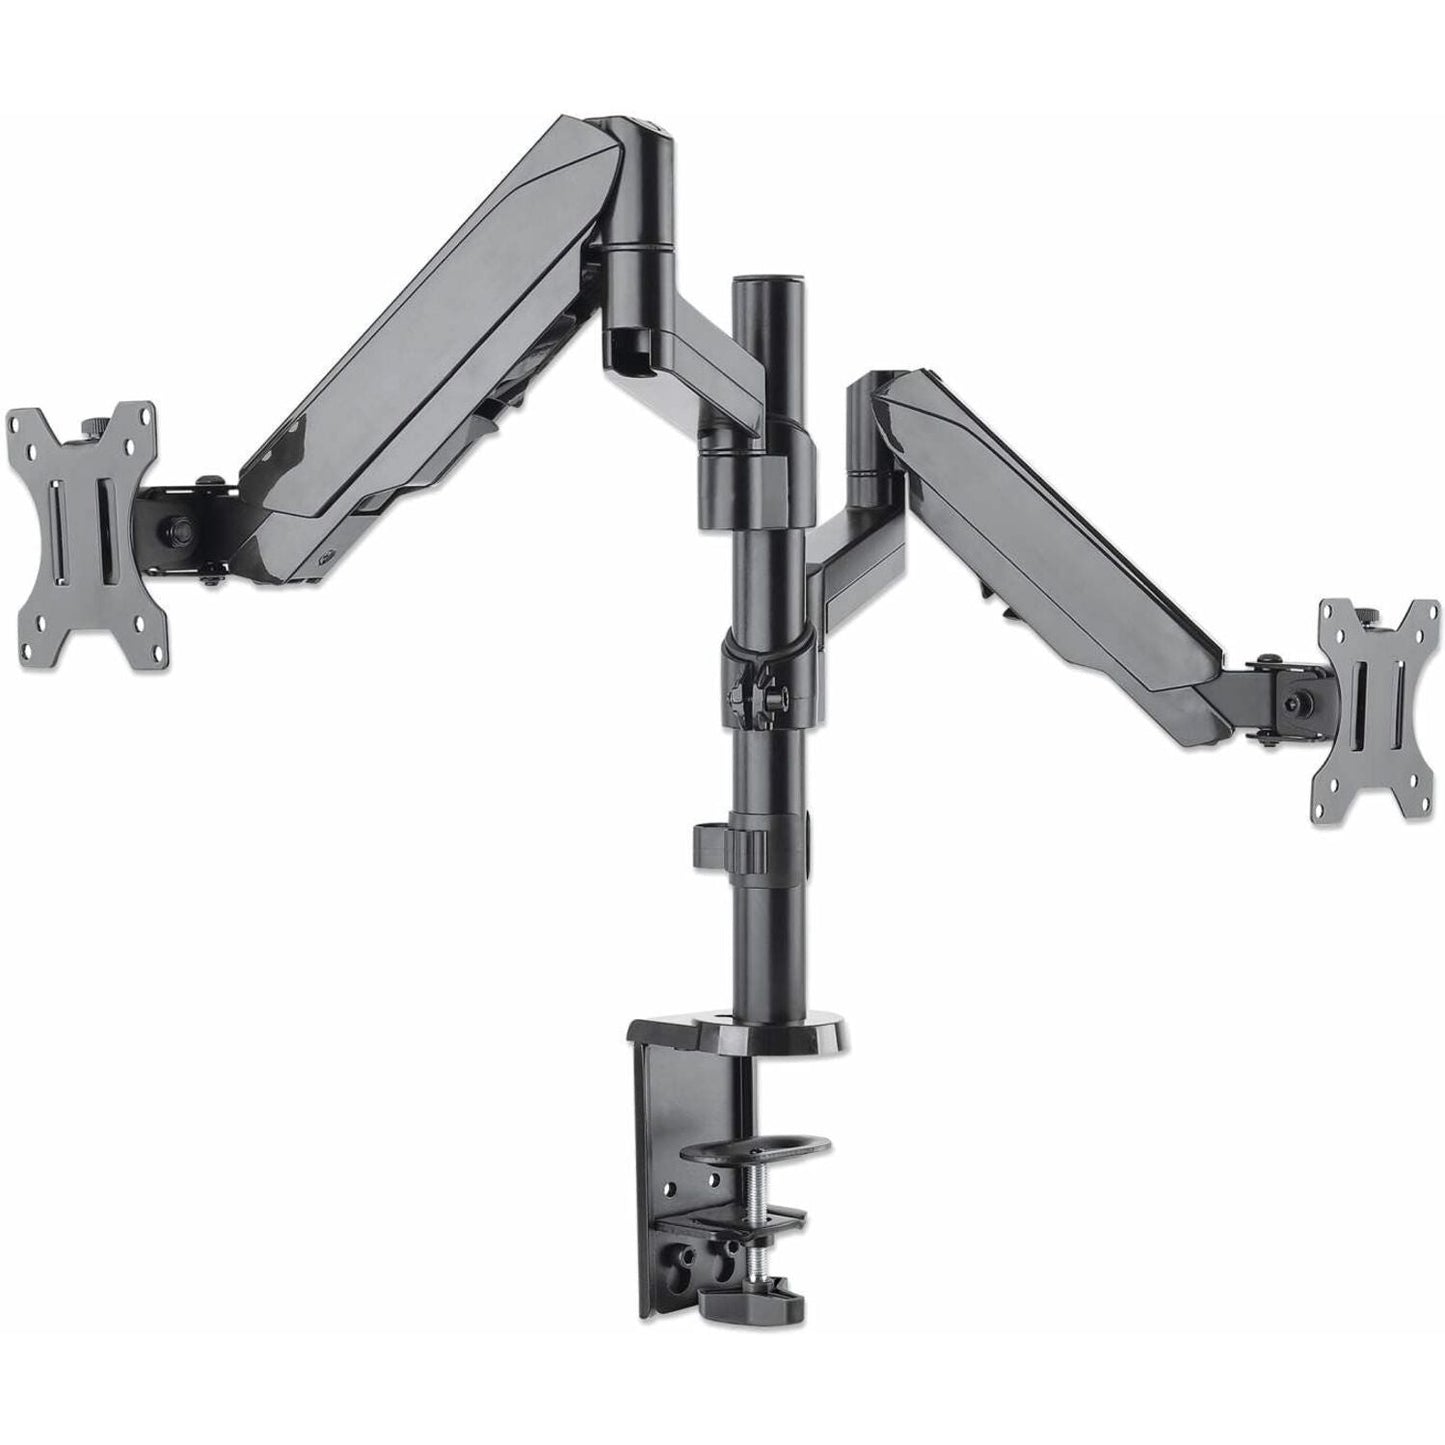 Manhattan 461597 Desk Mount for Curved Screen Display Flat Panel Display